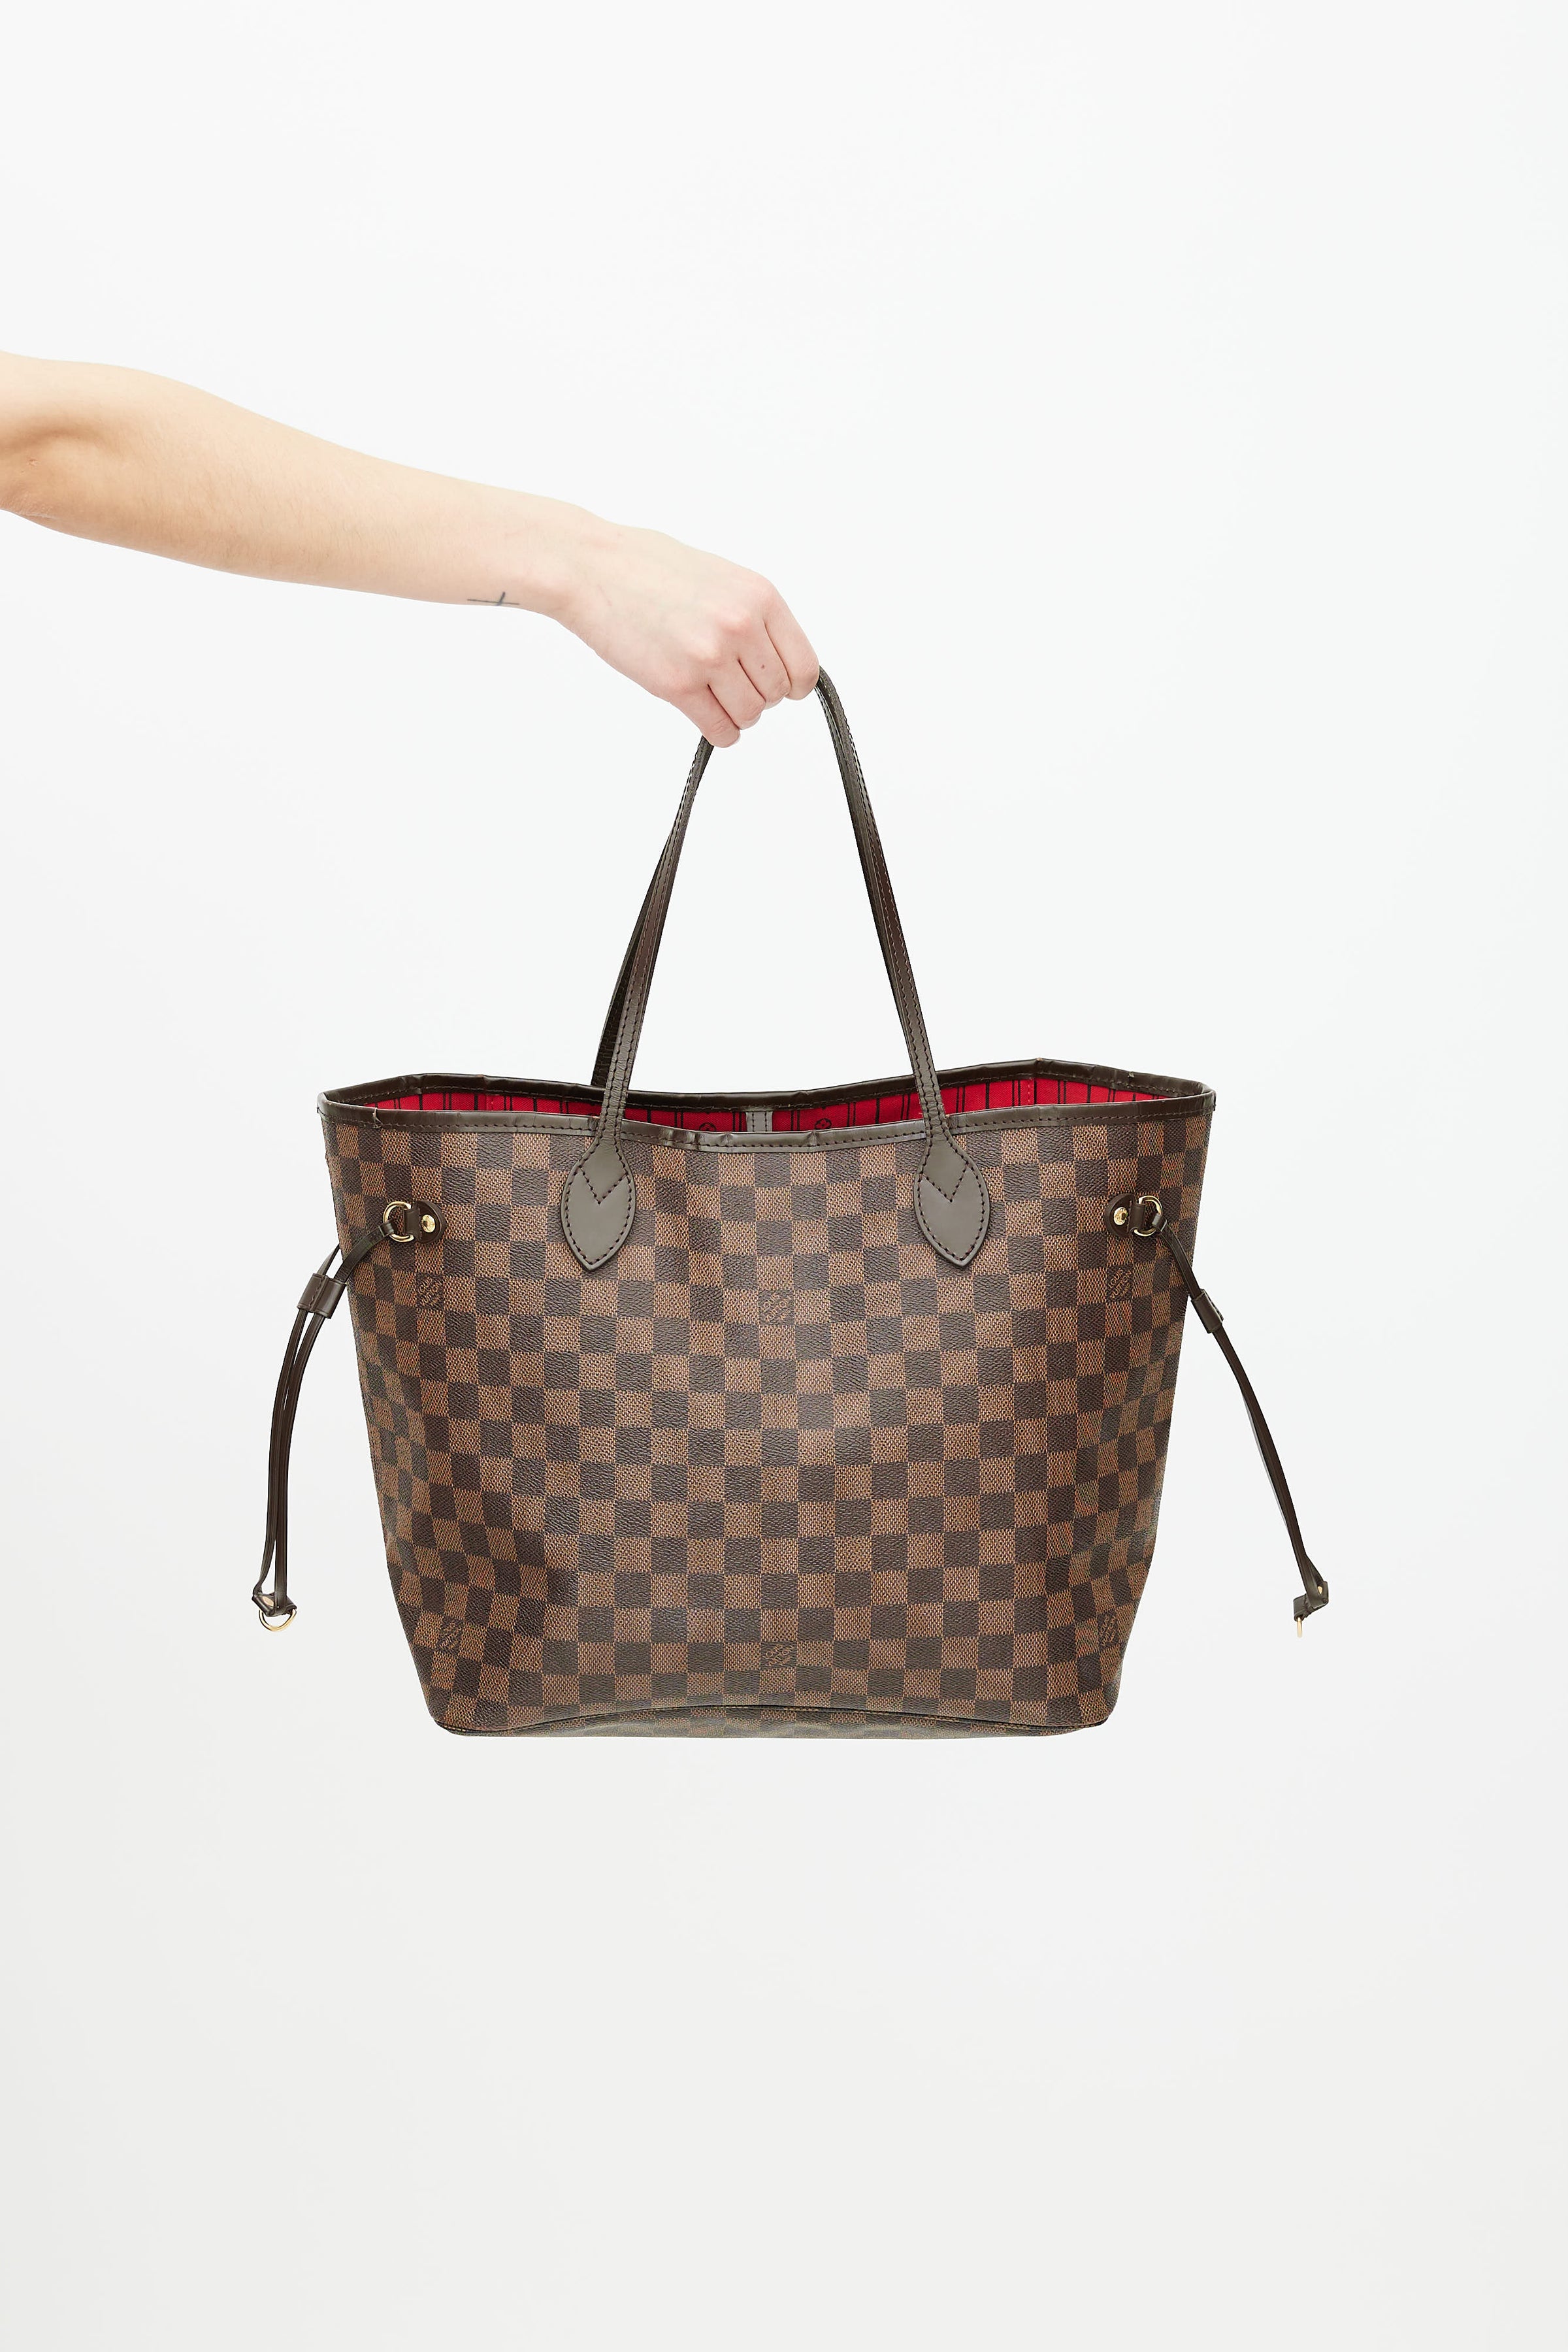 Louis Vuitton Neverfull MM - New in Dust Bag - The Consignment Cafe